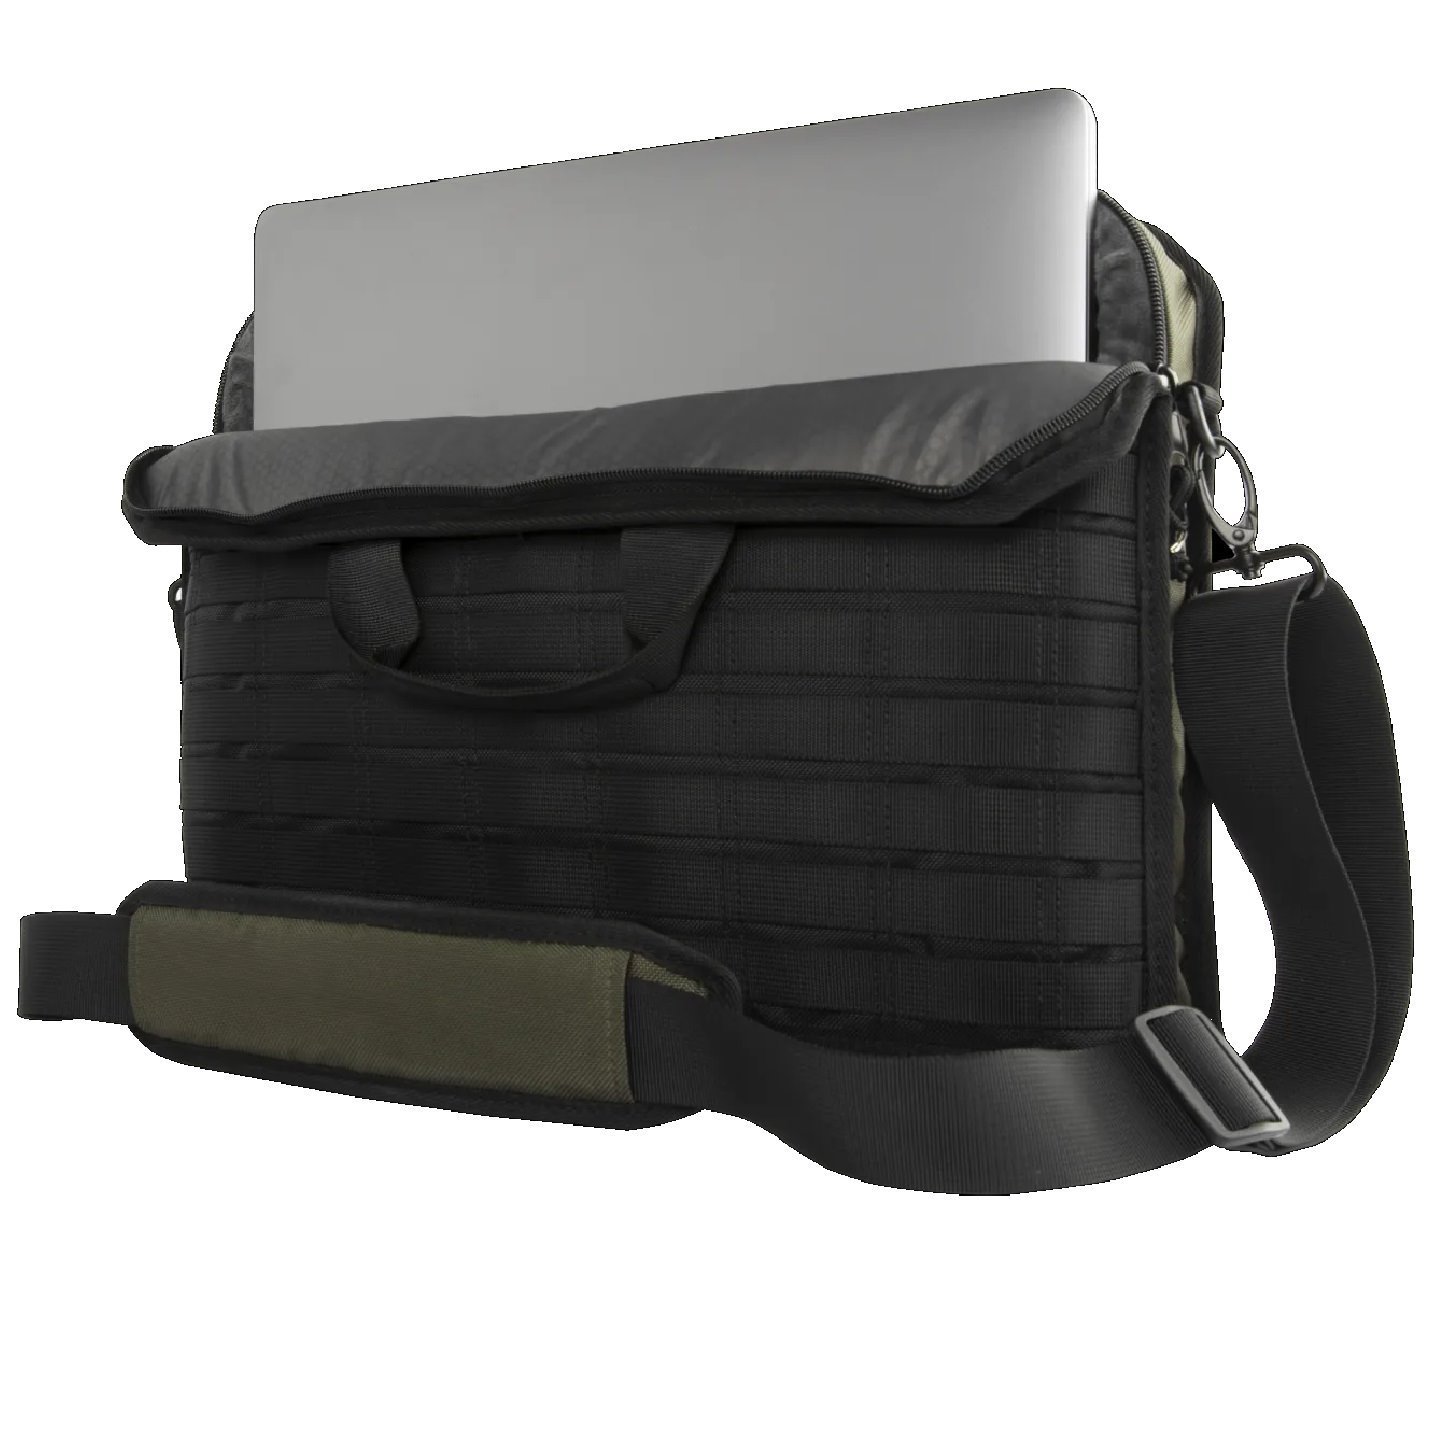 Uag Small Tactical Brief - Fits Up To 16 Devices - Black (982610114040), Drop+ Military Standard, Detachable Shoulder Strap, Dual Layer Protection